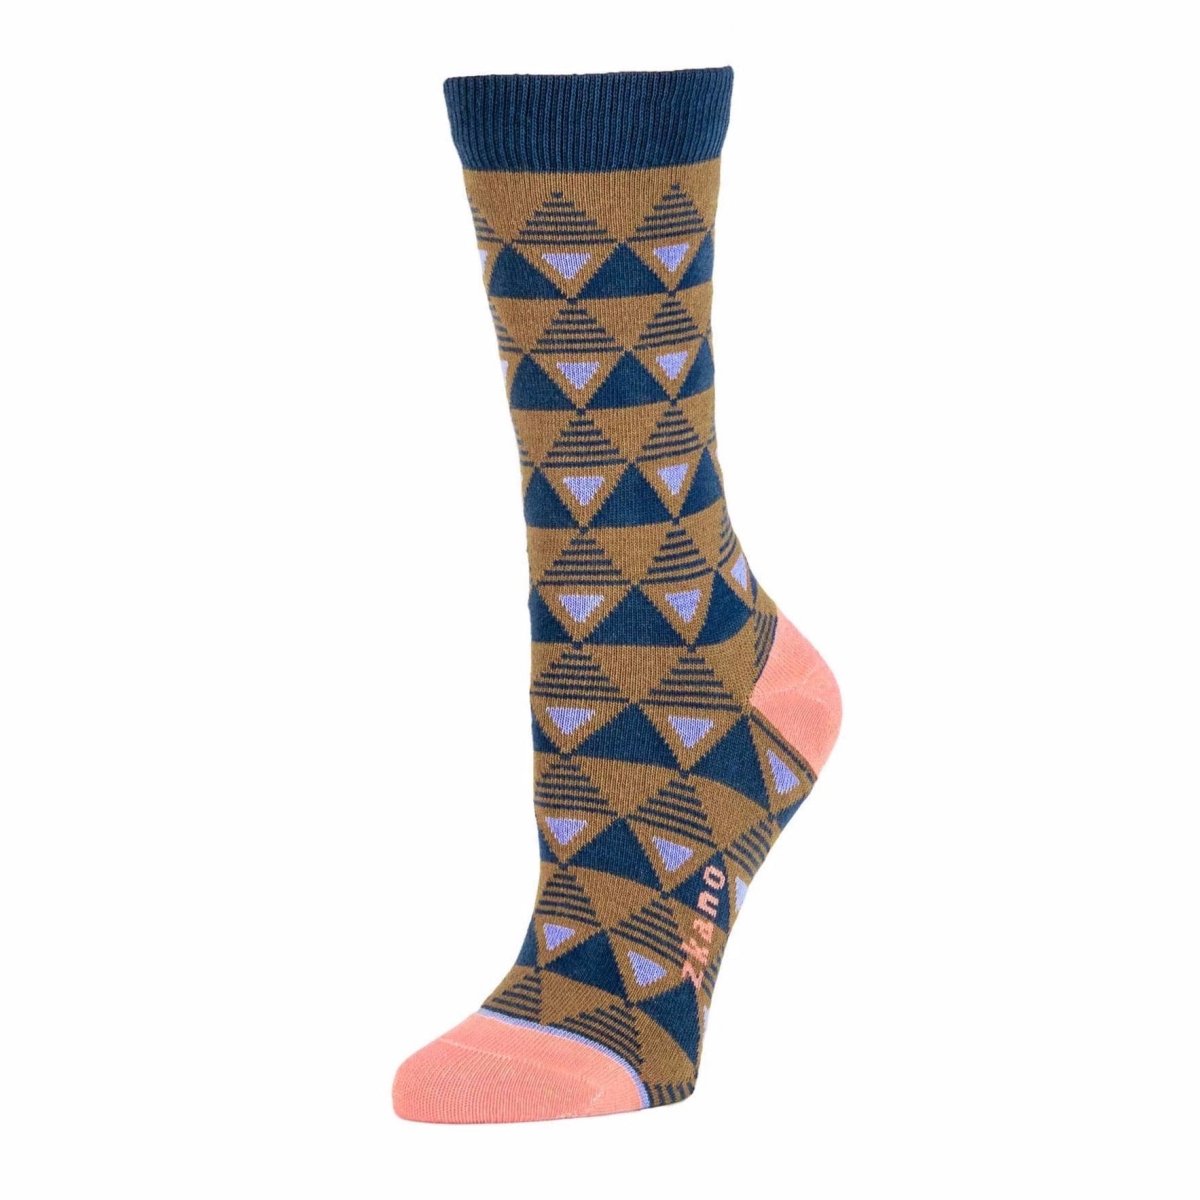 Light brown sock with navy blue triangular pattern and navy blue ribbed collar. Heel and toe are a light pink as well as the logo along the arch. The Sierra Sock in Bronze is from Zkano and made in Alabama, USA.